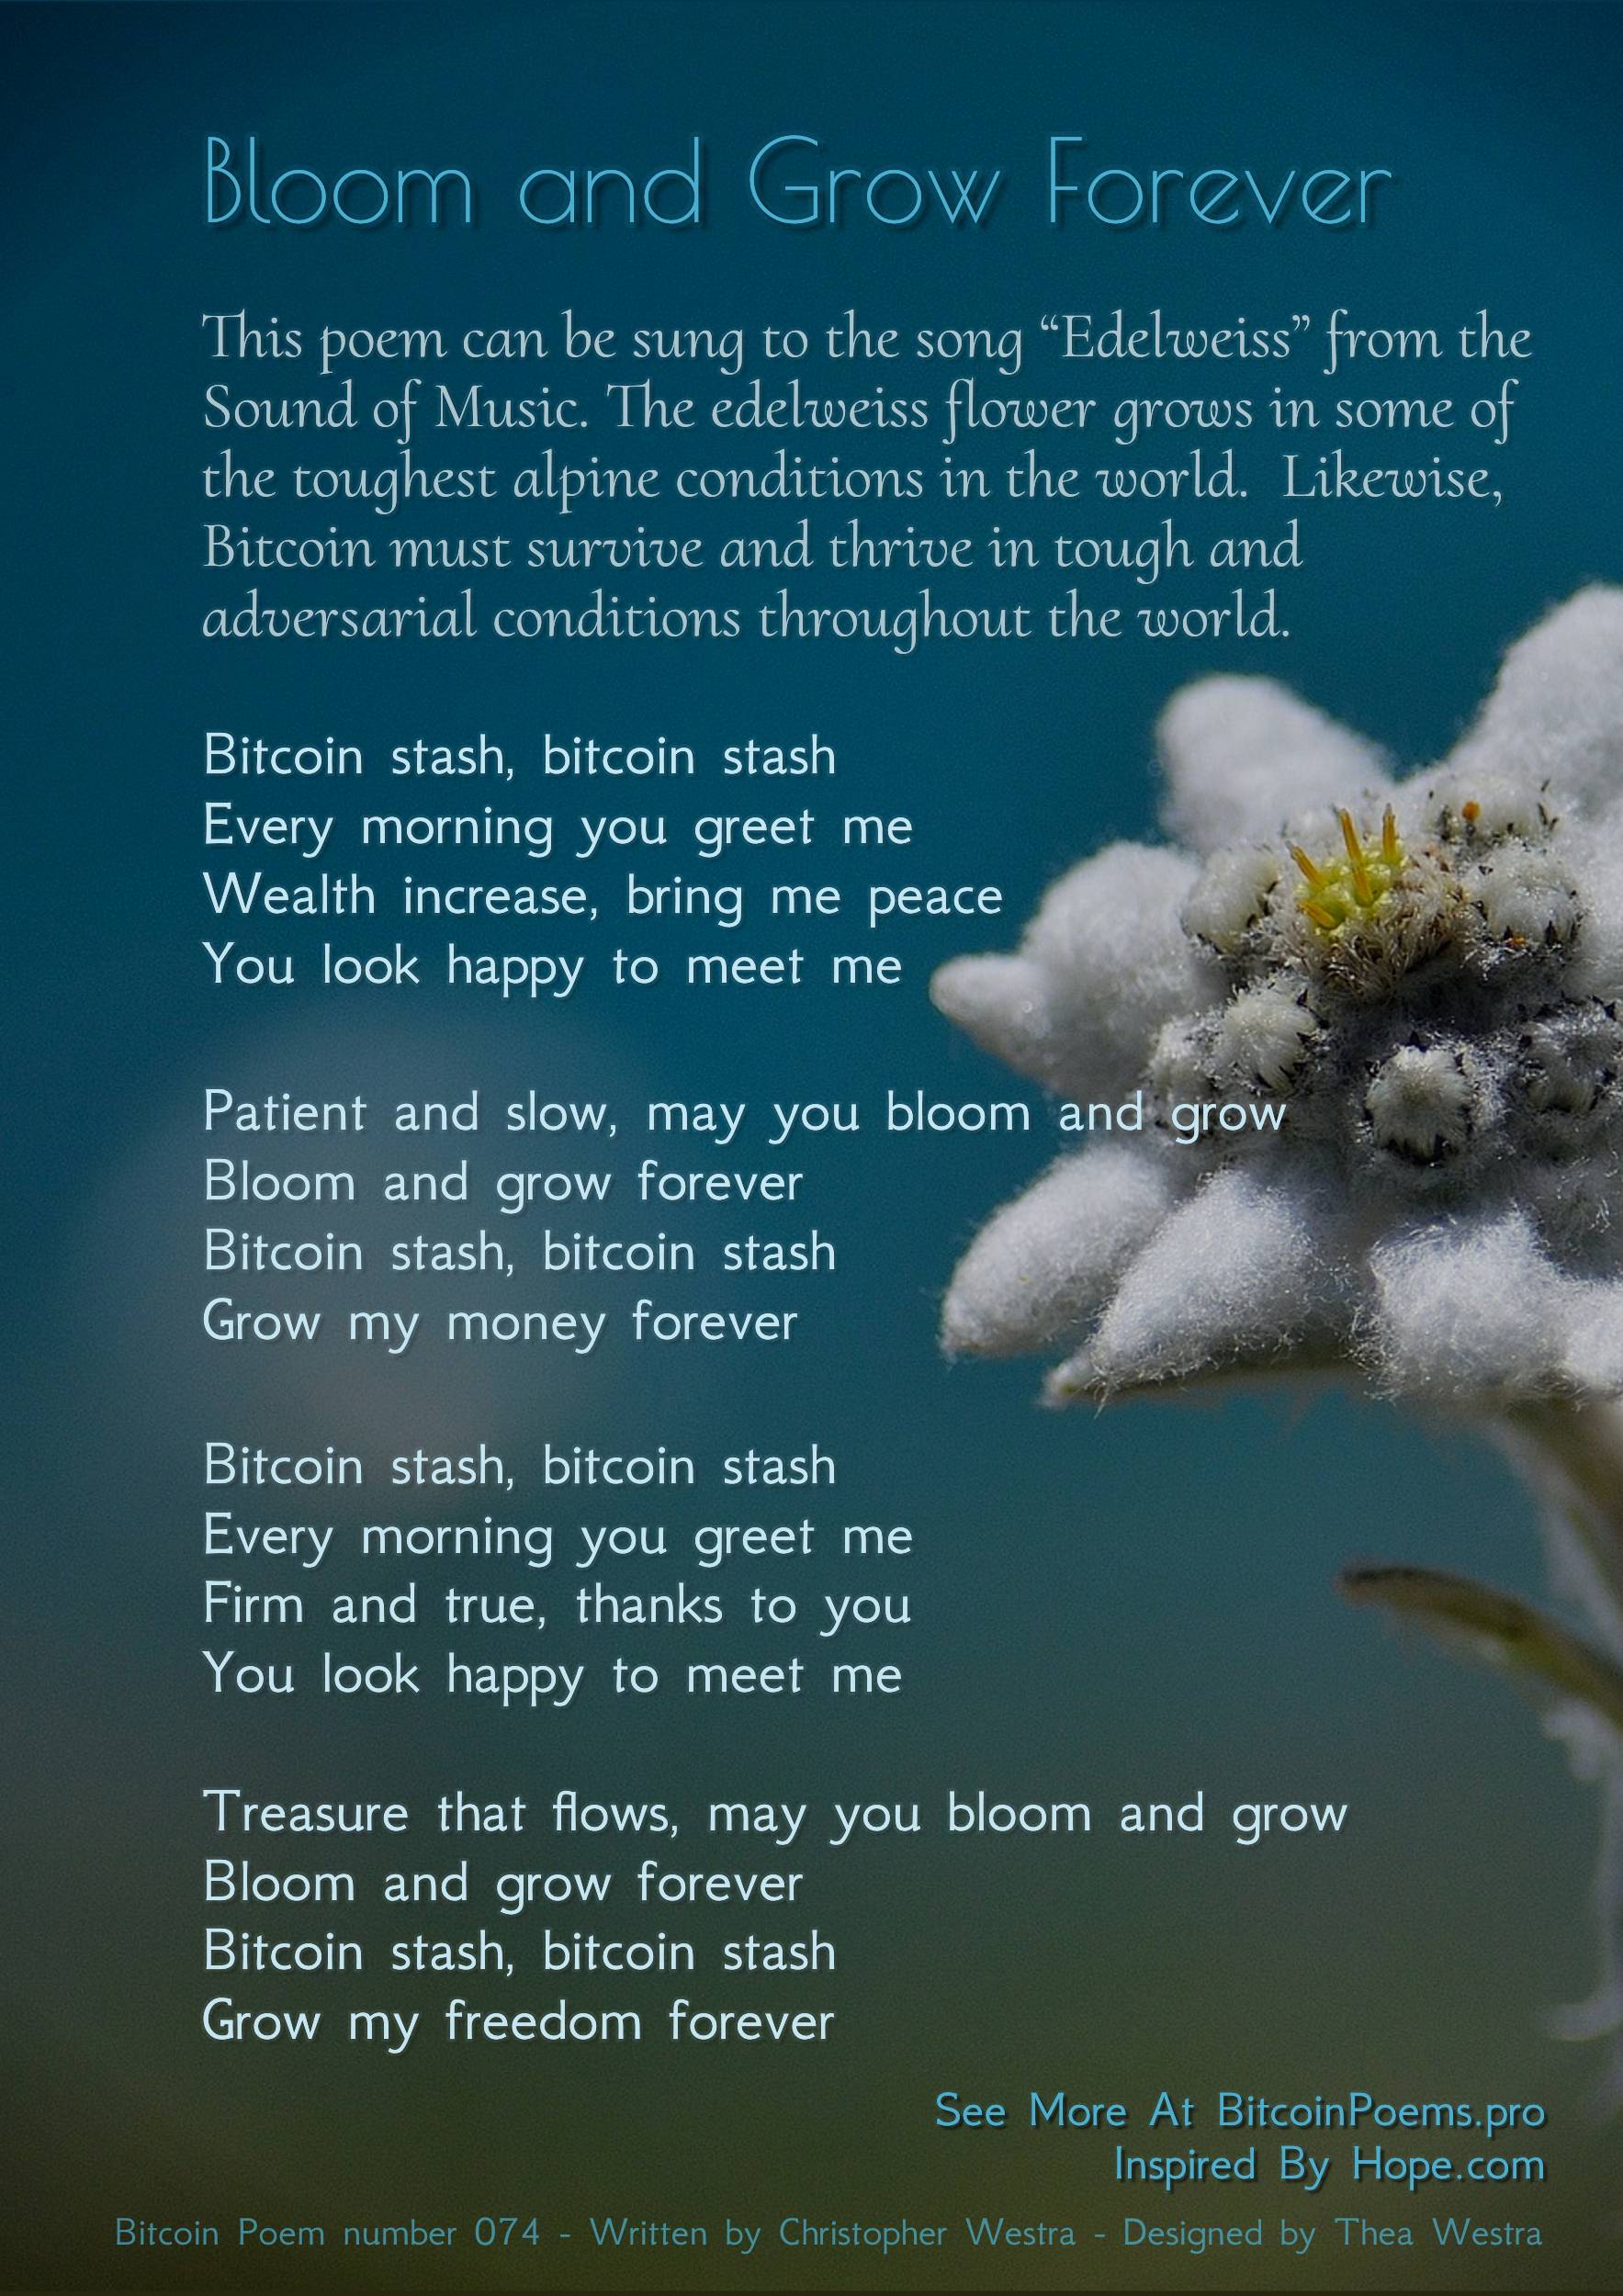 Bloom and Grow Forever - Bitcoin Poem 074 by Christopher Westra